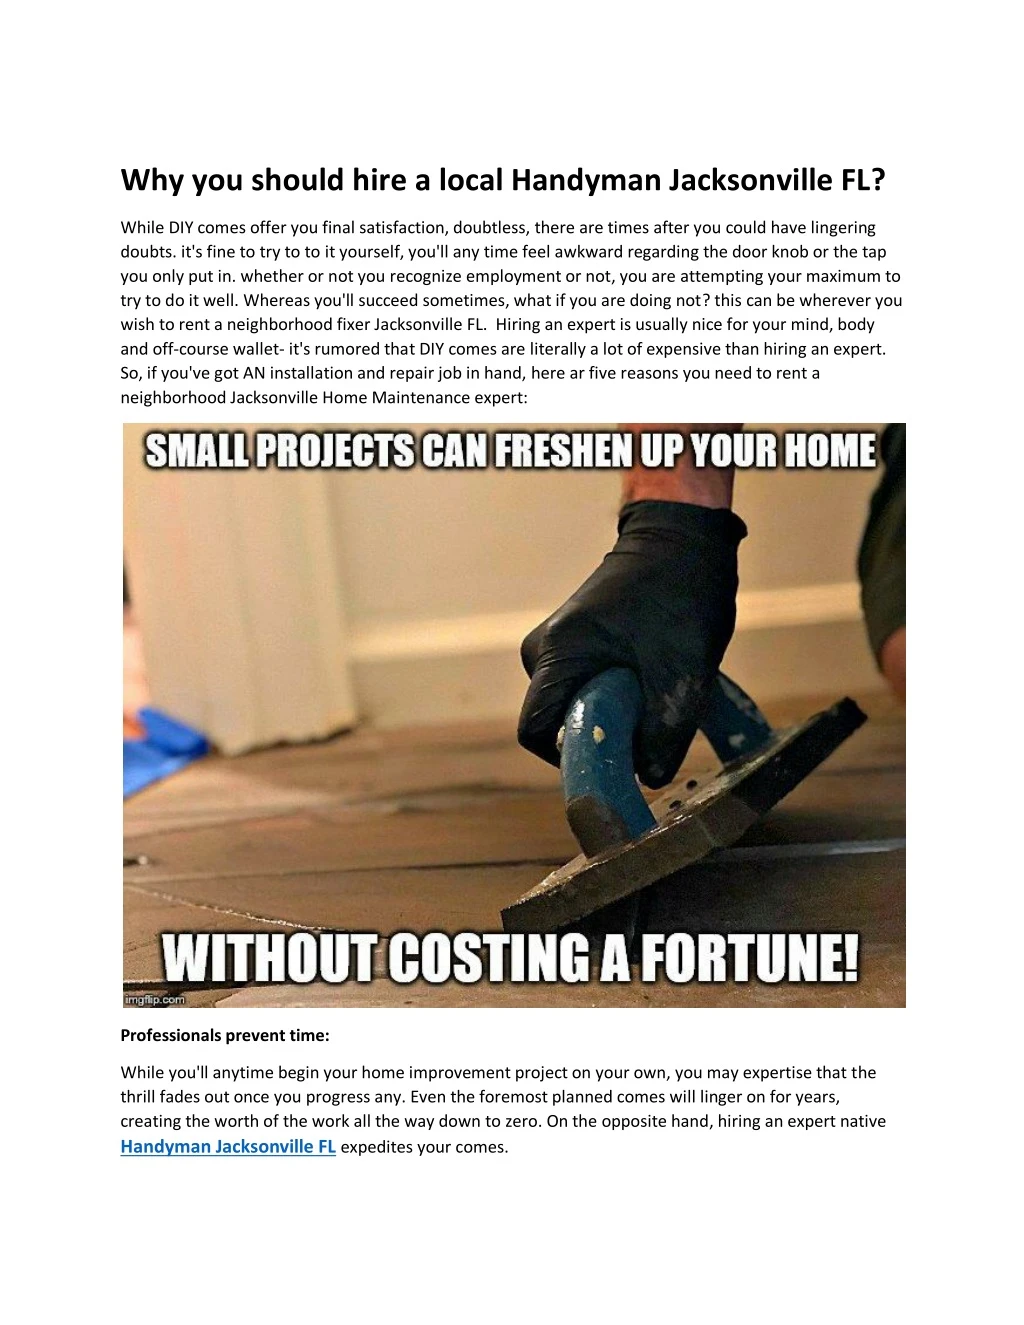 why you should hire a local handyman jacksonville